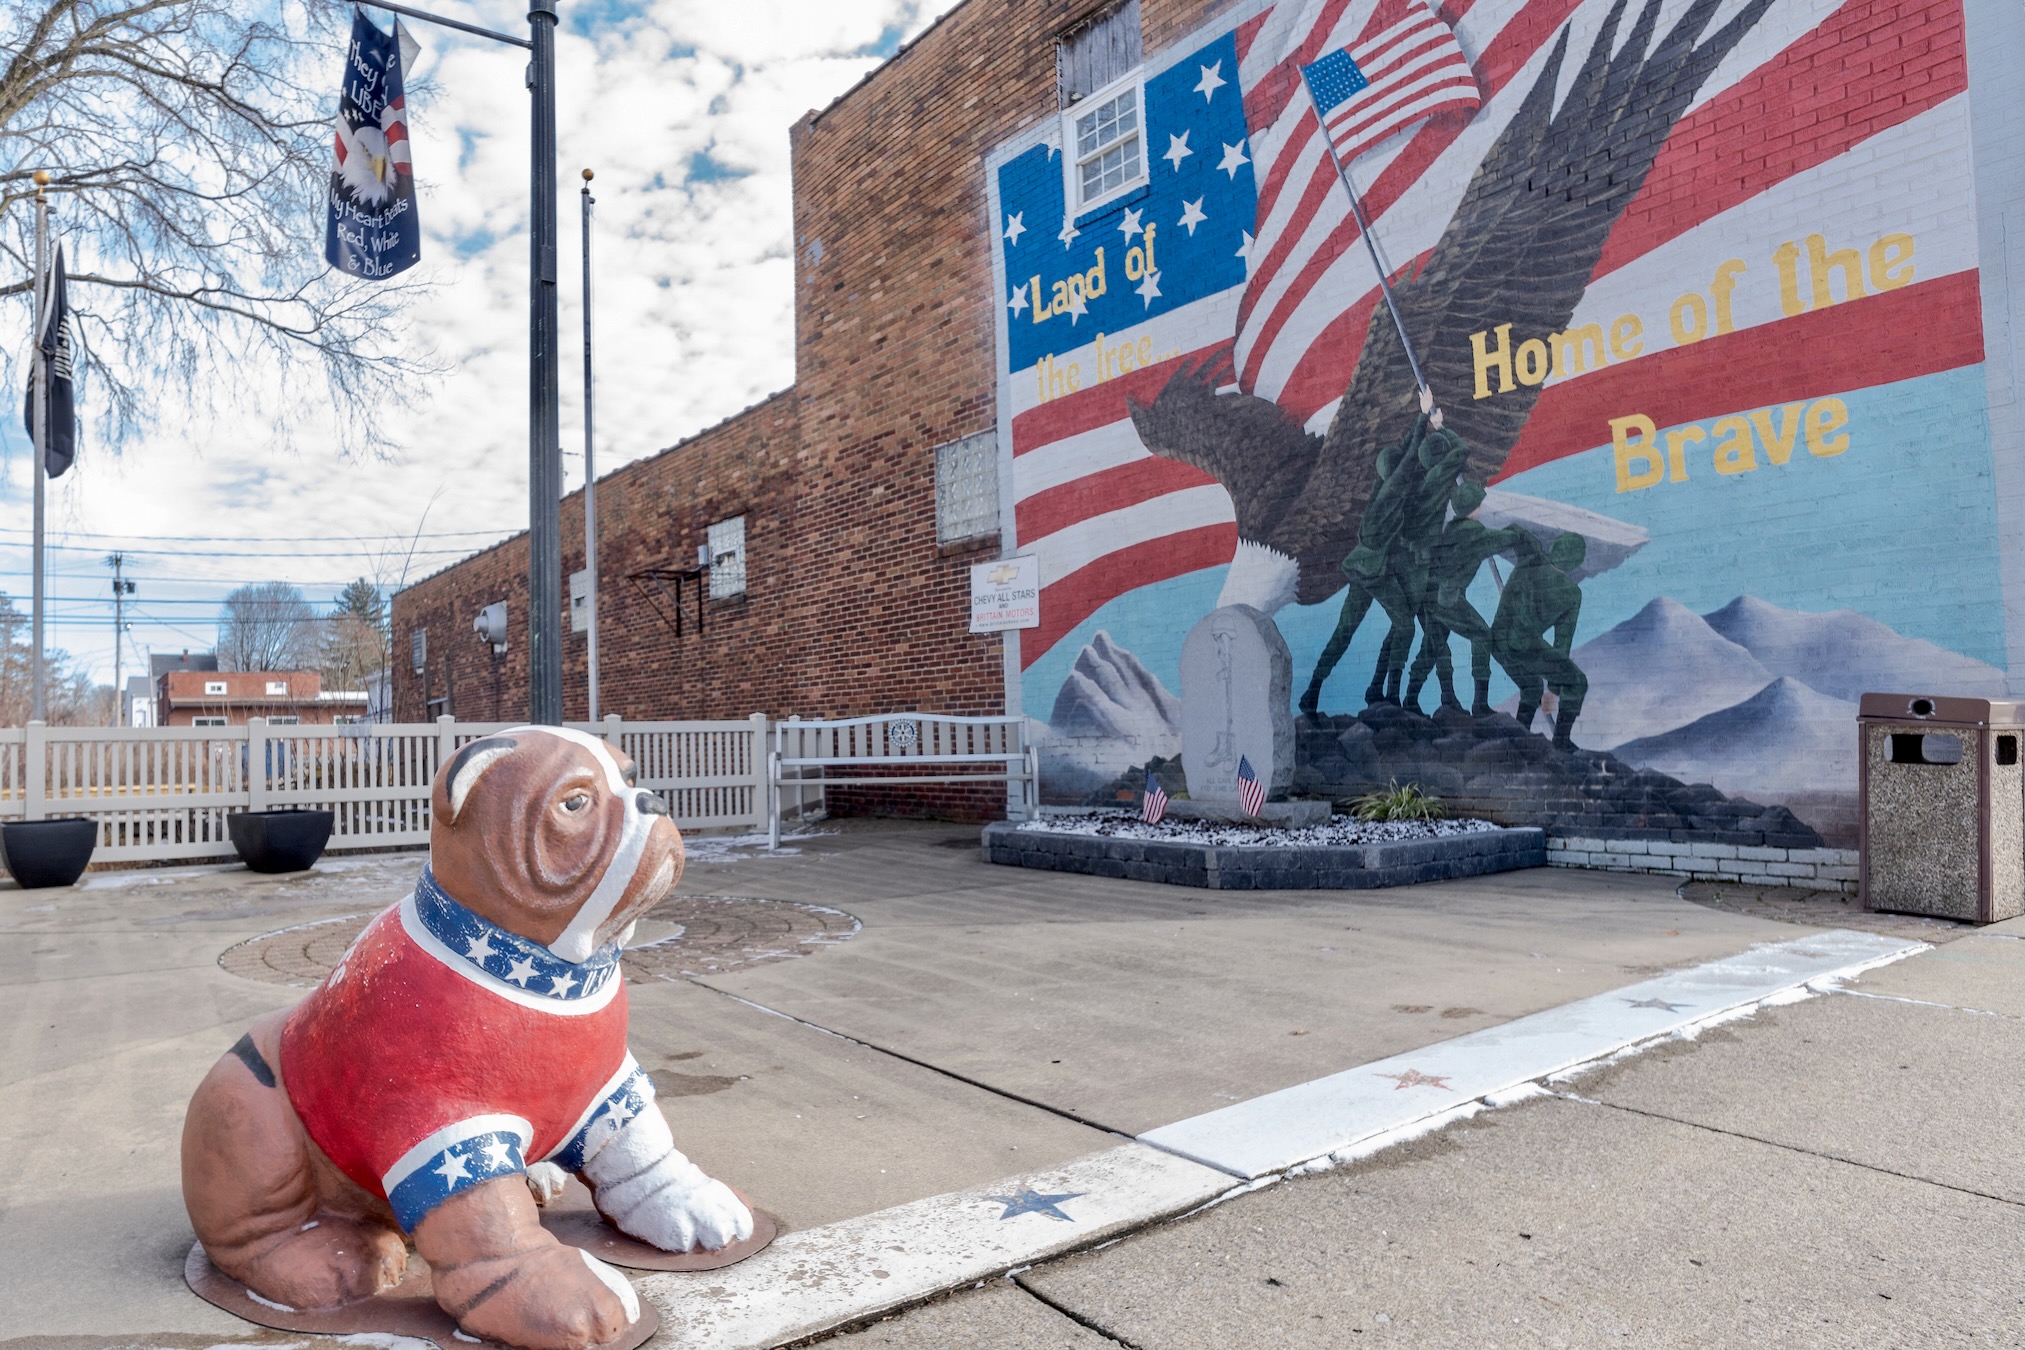 A statue of a bulldog painted red, white and blue sits along the sidewalk with a patriotic mural in the background